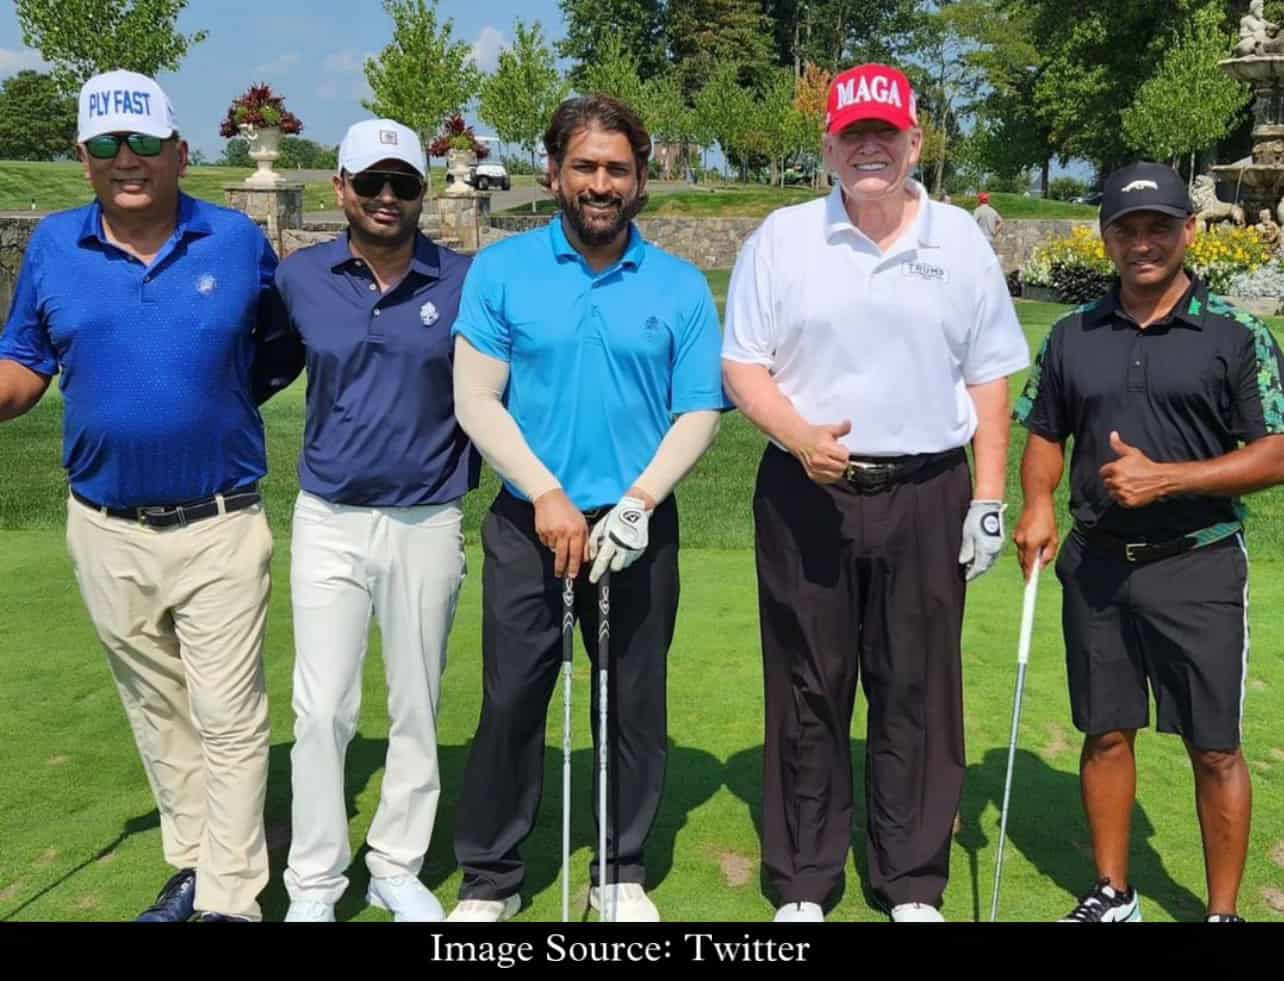 [Watch] Former US President Donald Trump Hosts MS Dhoni for a Golf Match, Video Goes Viral 